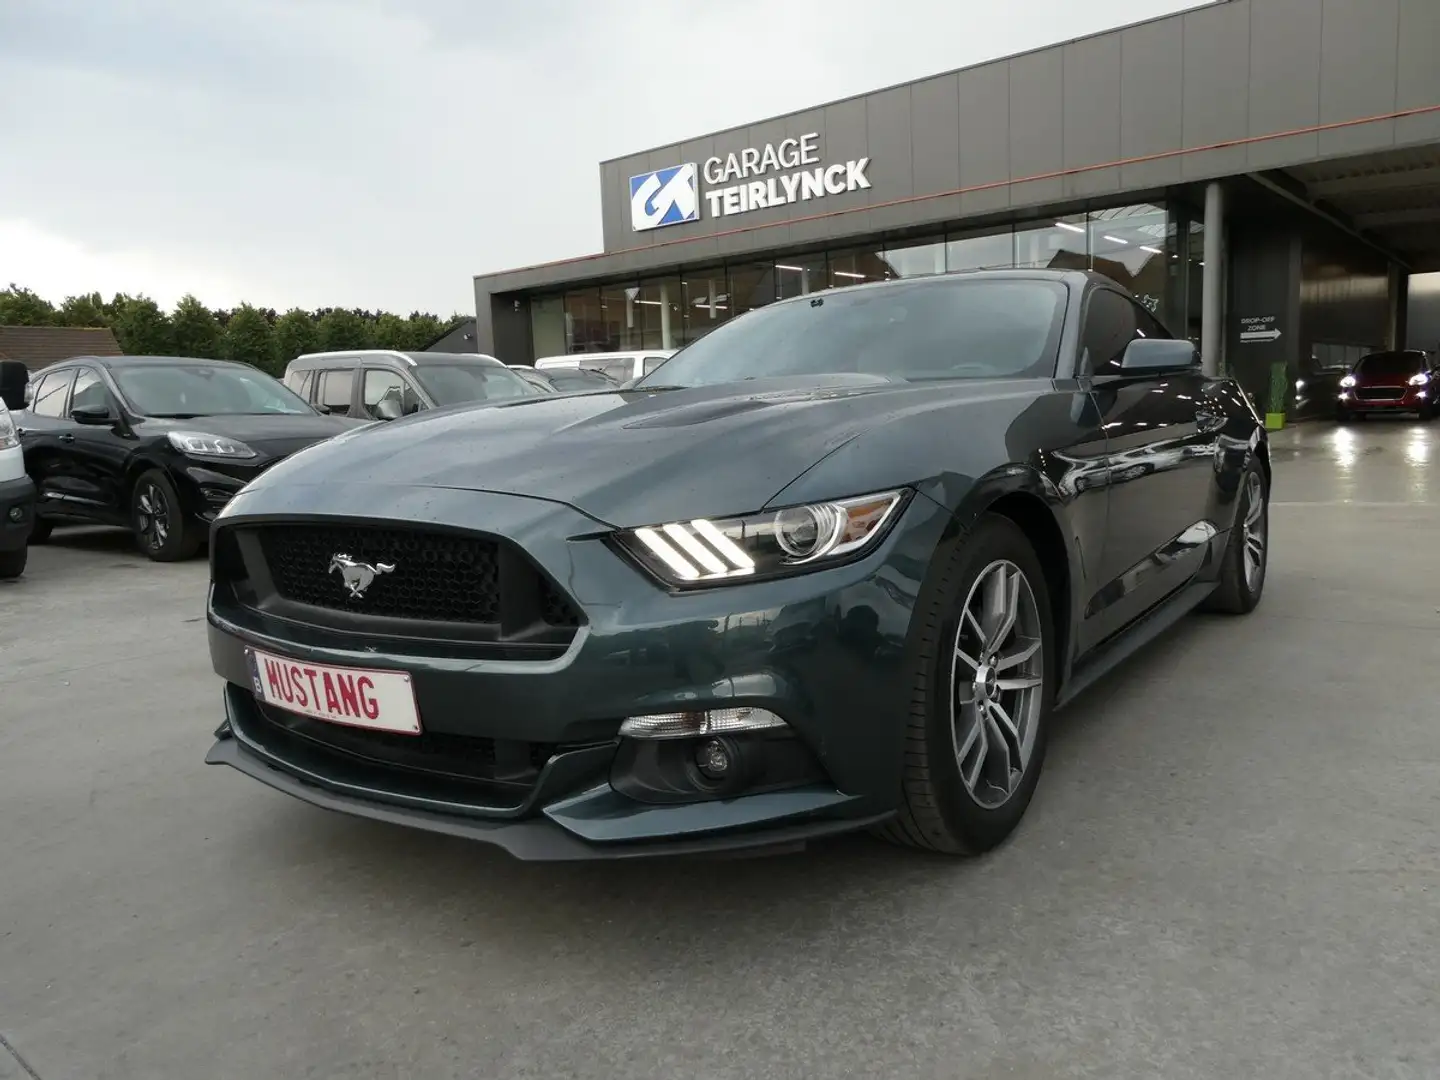 Ford Mustang Coupe Automaat 2.3 i 317pk '15 33000km (48593) Verde - 2